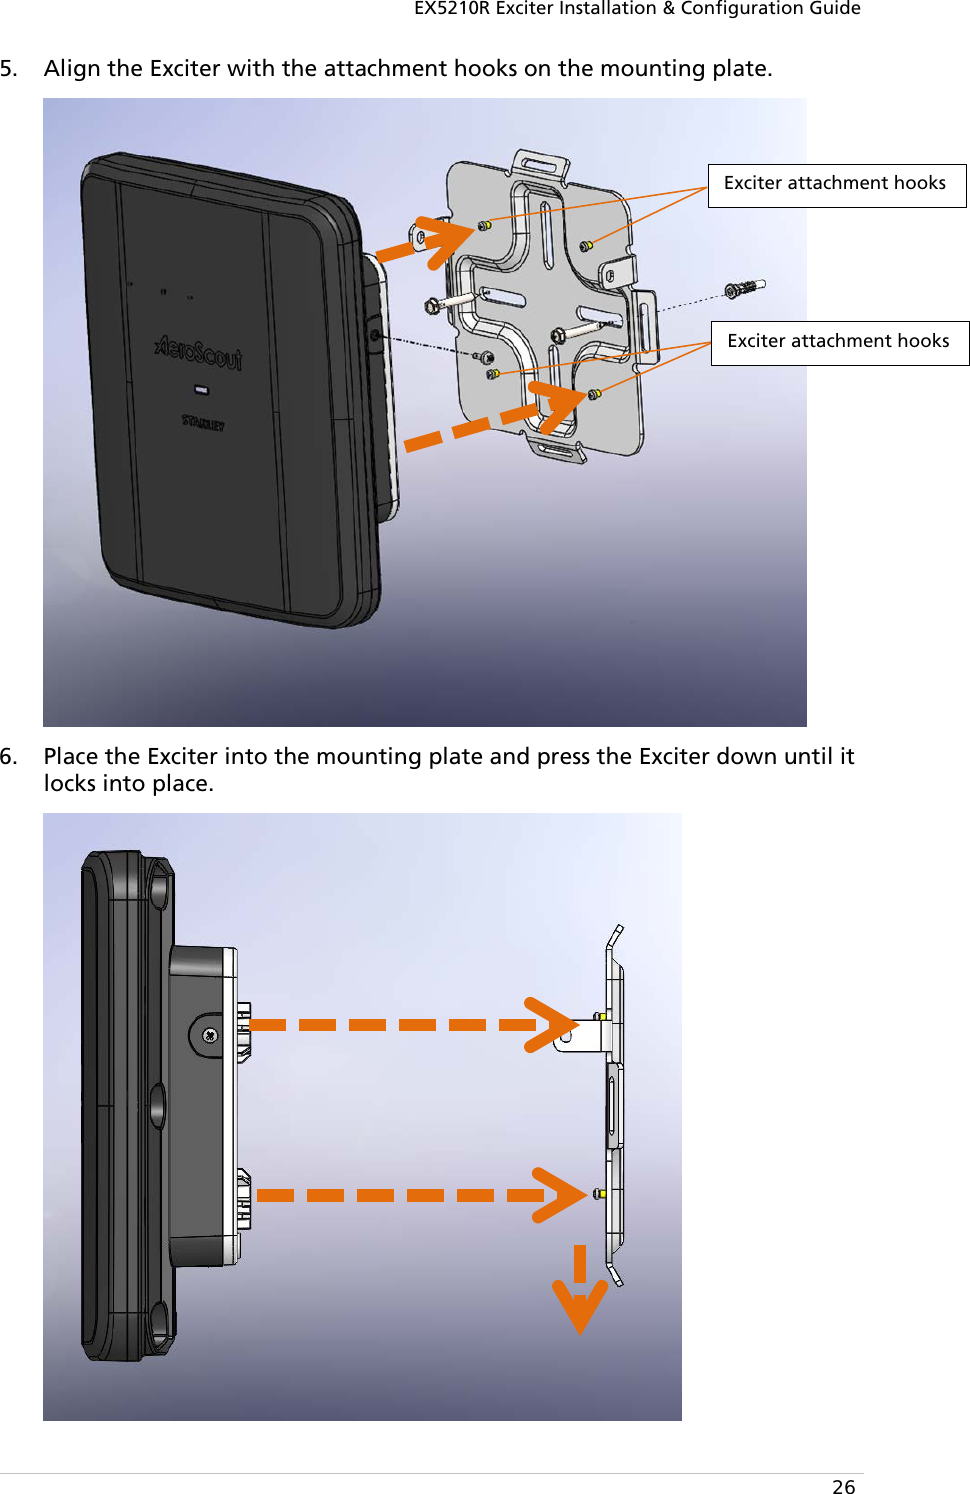 EX5210R Exciter Installation &amp; Configuration Guide  26 5. Align the Exciter with the attachment hooks on the mounting plate.  6. Place the Exciter into the mounting plate and press the Exciter down until it locks into place.  Exciter attachment hooks Exciter attachment hooks 